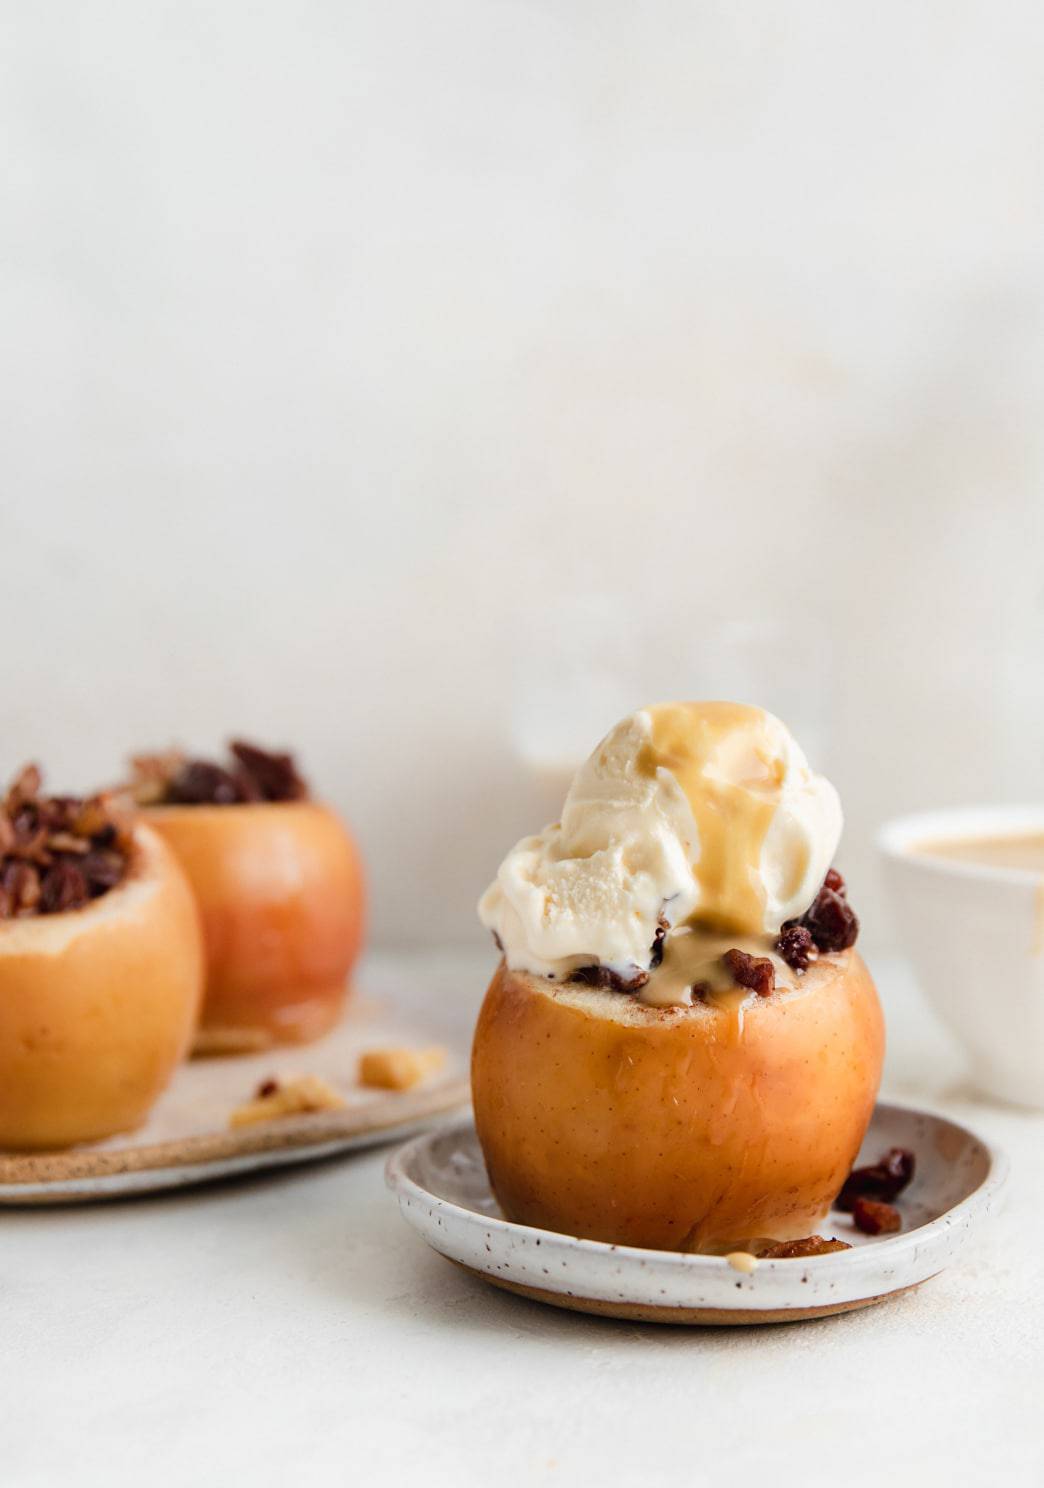 Slow cooker baked apples on a plate with toppings.